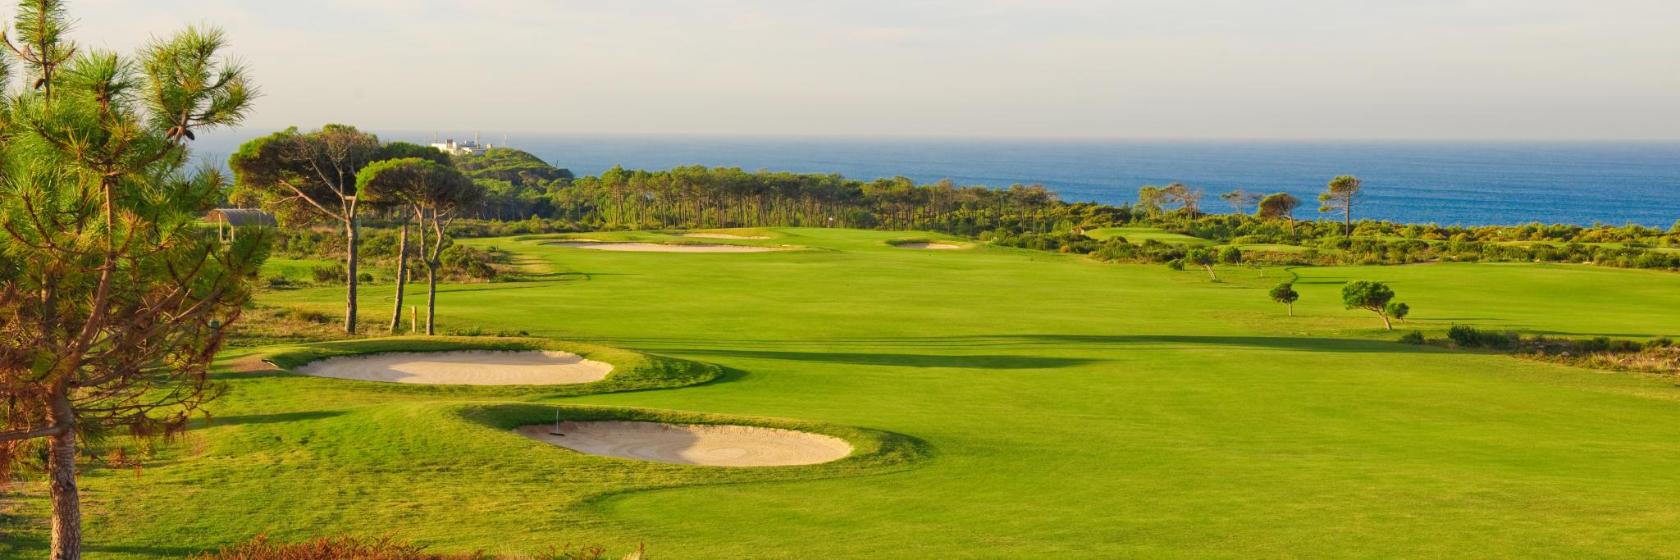 The 10 best hotels near Oitavos Dunes Golf Course in Cascais, Portugal